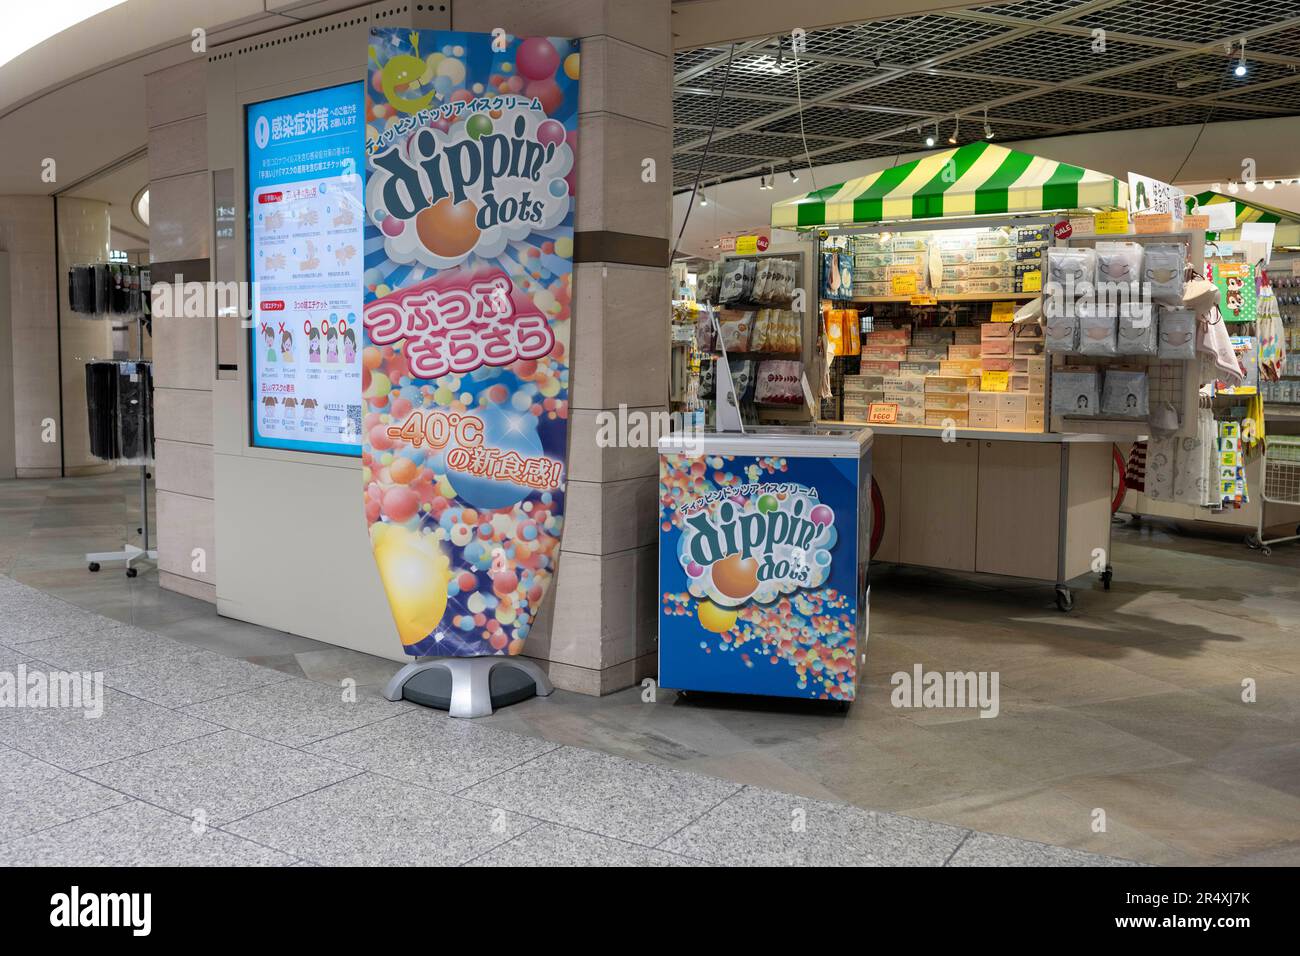 Dippin Dots Royalty-Free Images, Stock Photos & Pictures